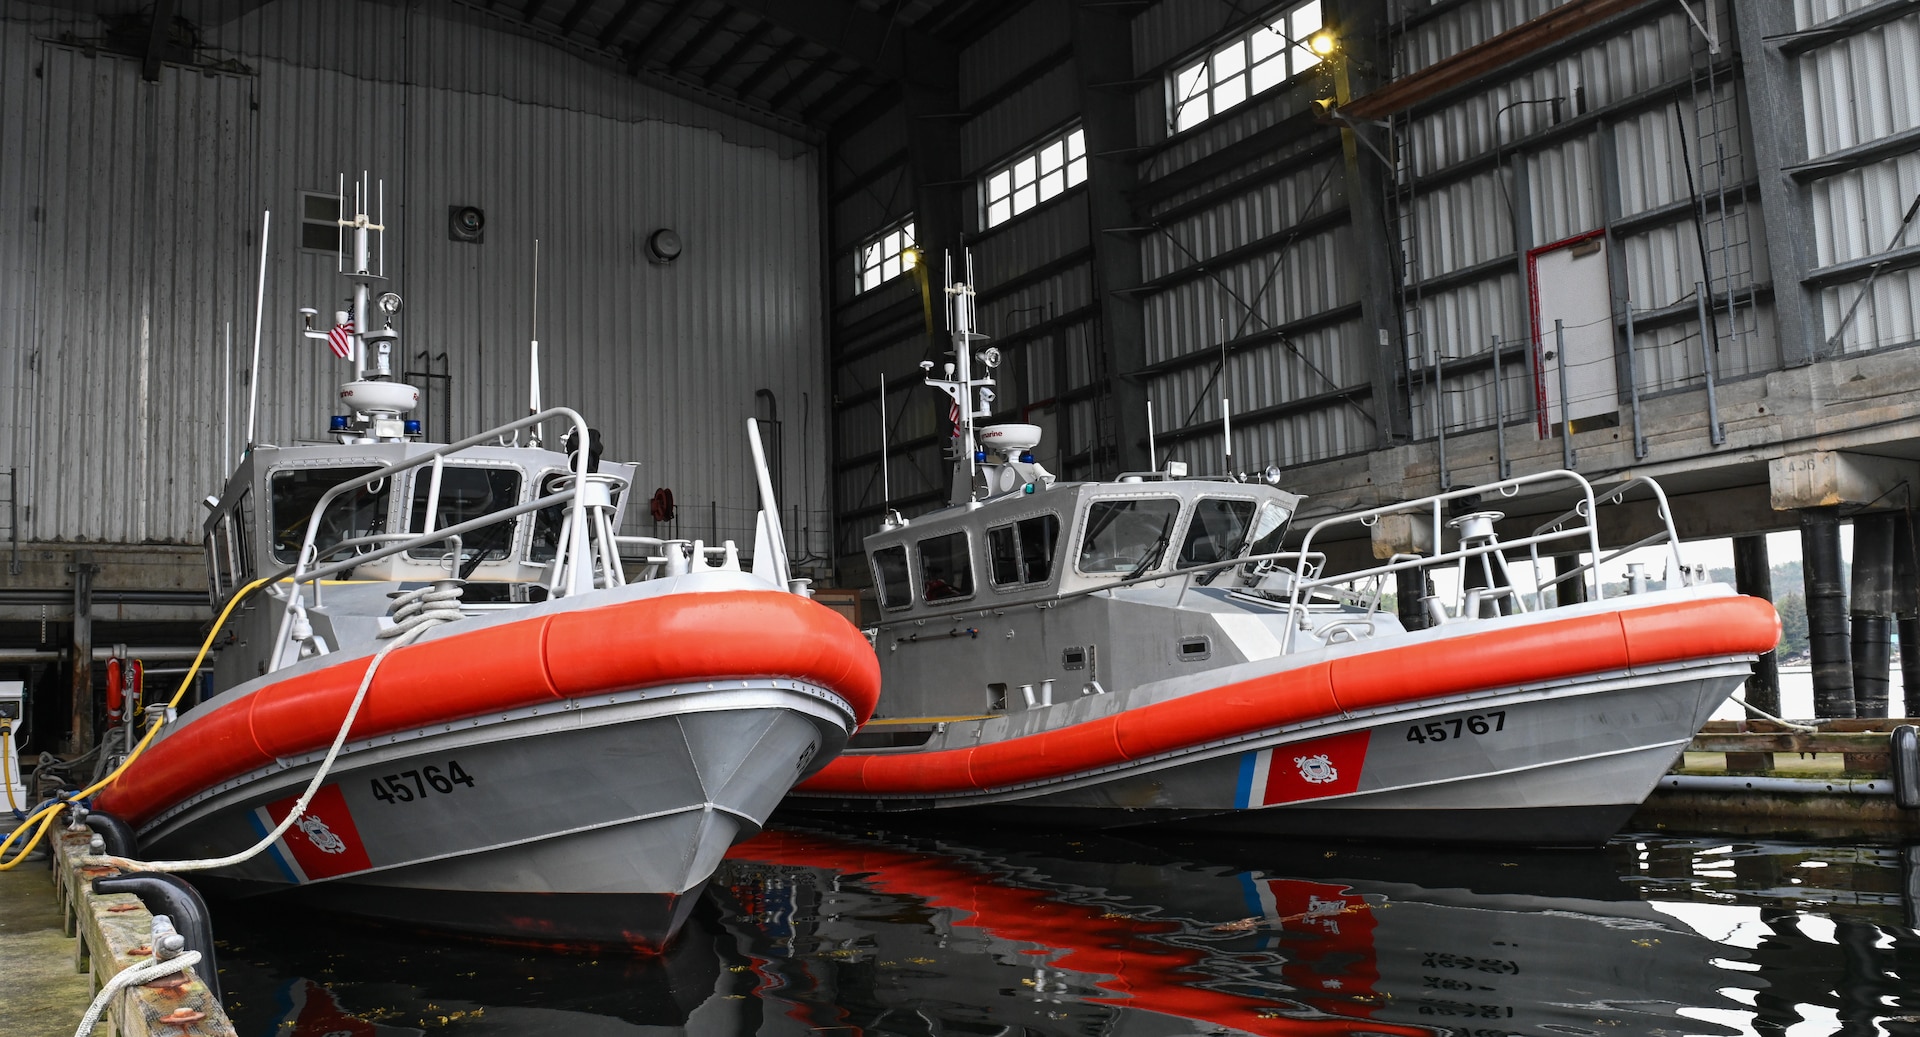 Two Coast Guard 45-foot Response Boats-Medium are photographed moored at Coast Guard Station Ketchikan, Alaska, April 28, 2023. Station Ketchikan is equipped with two 29-foot Response Boats-Small and two 45-foot Response Boats-Medium which are used to carry out missions throughout southeastern Alaska such as law enforcement, living marine resources enforcement and search & rescue. U.S. Coast Guard photo by Petty Officer 3rd Class Ian Gray.